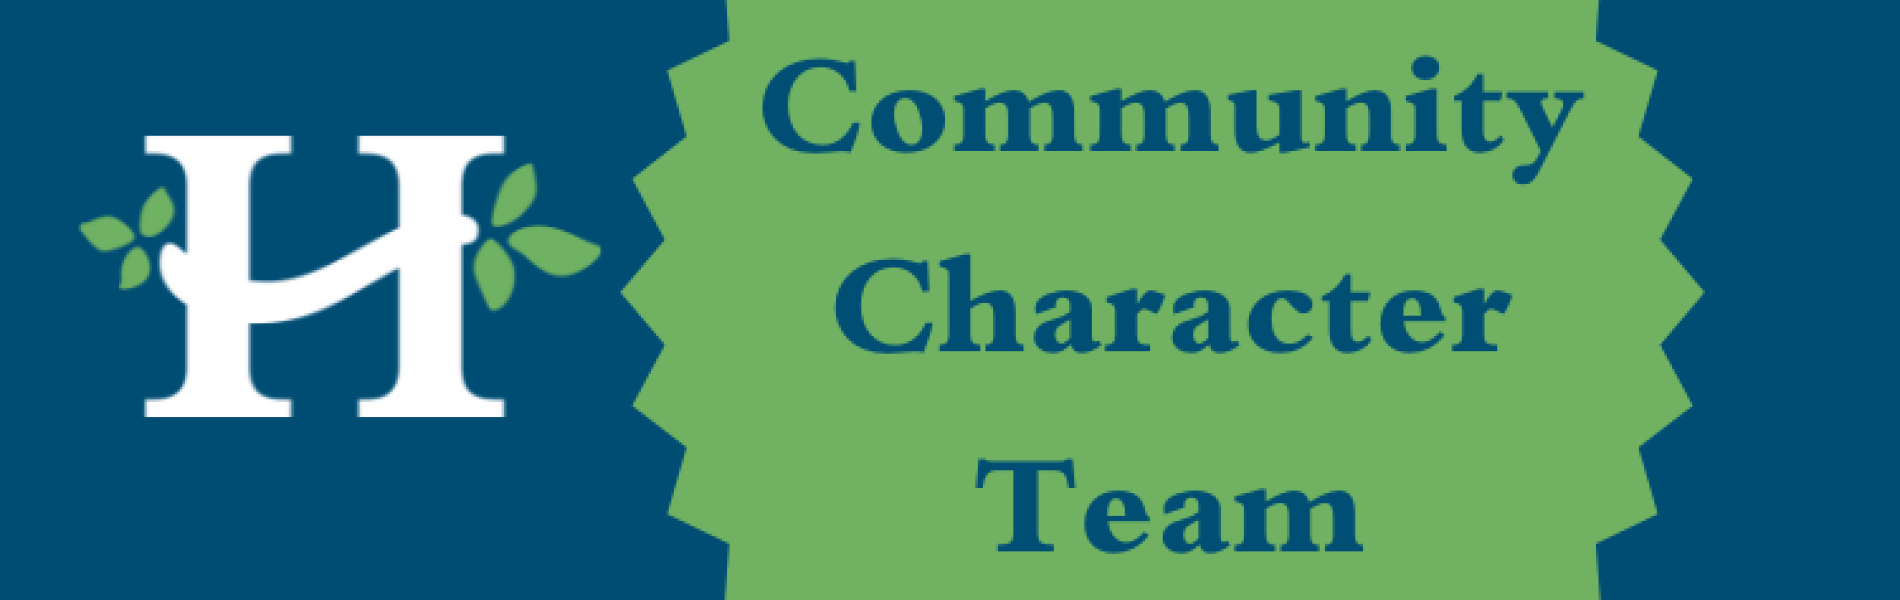 community character team graphic